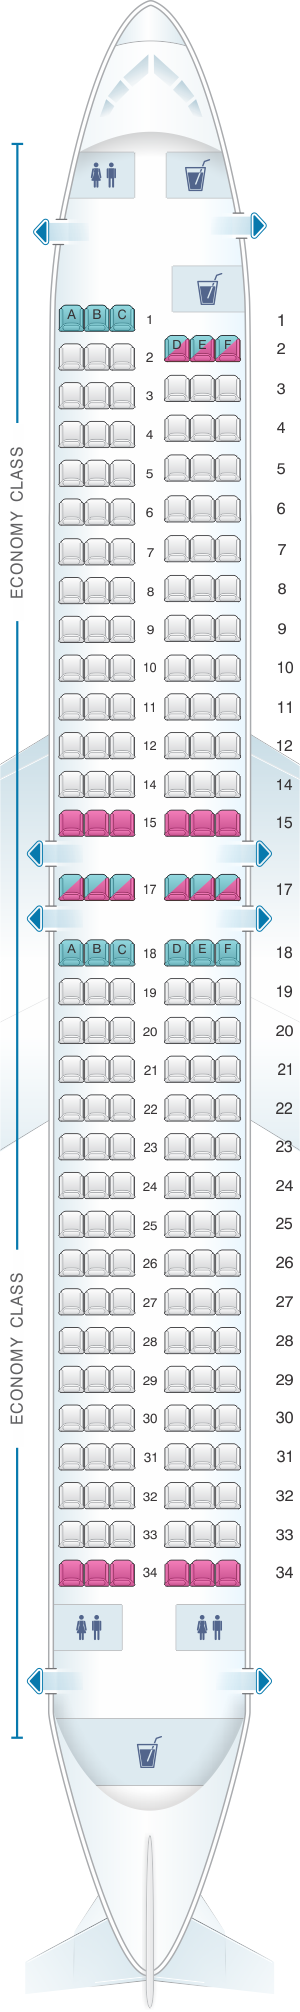 Seat map for SunExpress Boeing B737-800